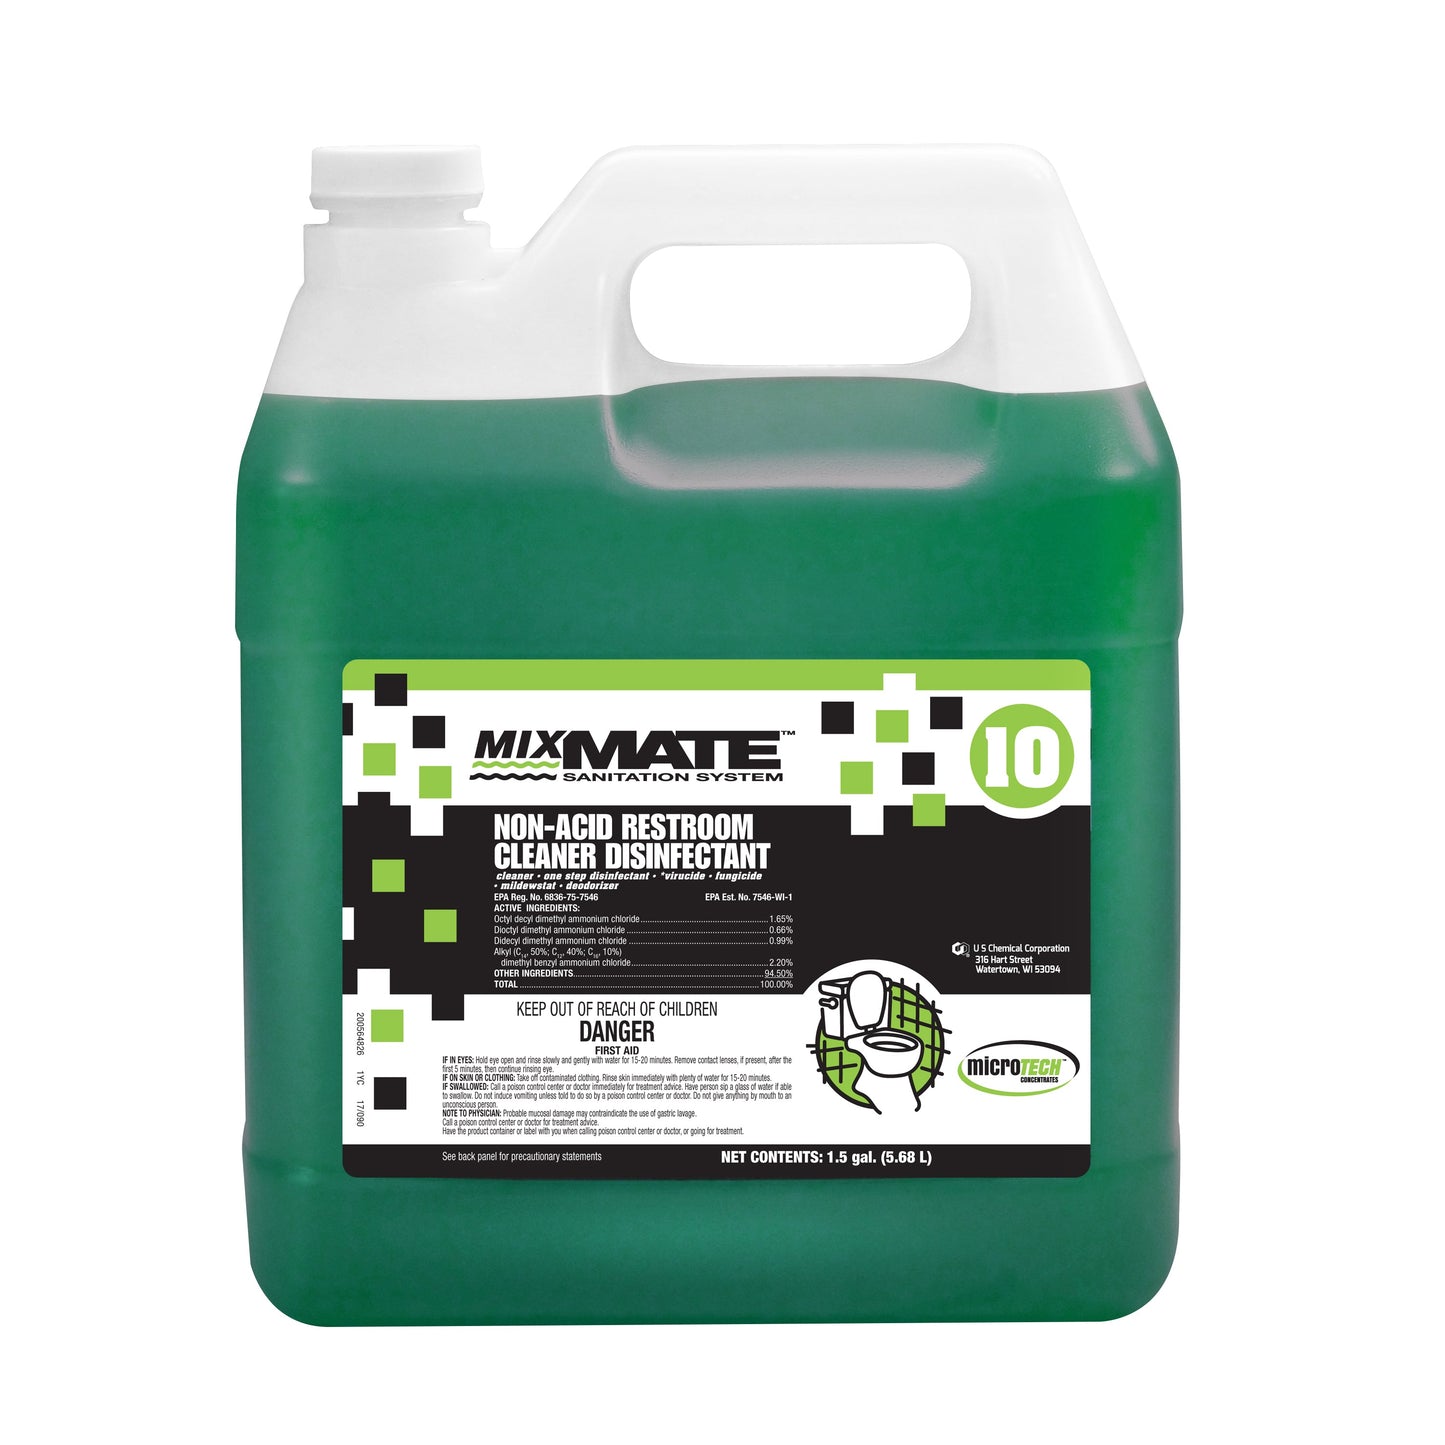 MixMATE microTECH Non-Acid Restroom Cleaner Disinfectant